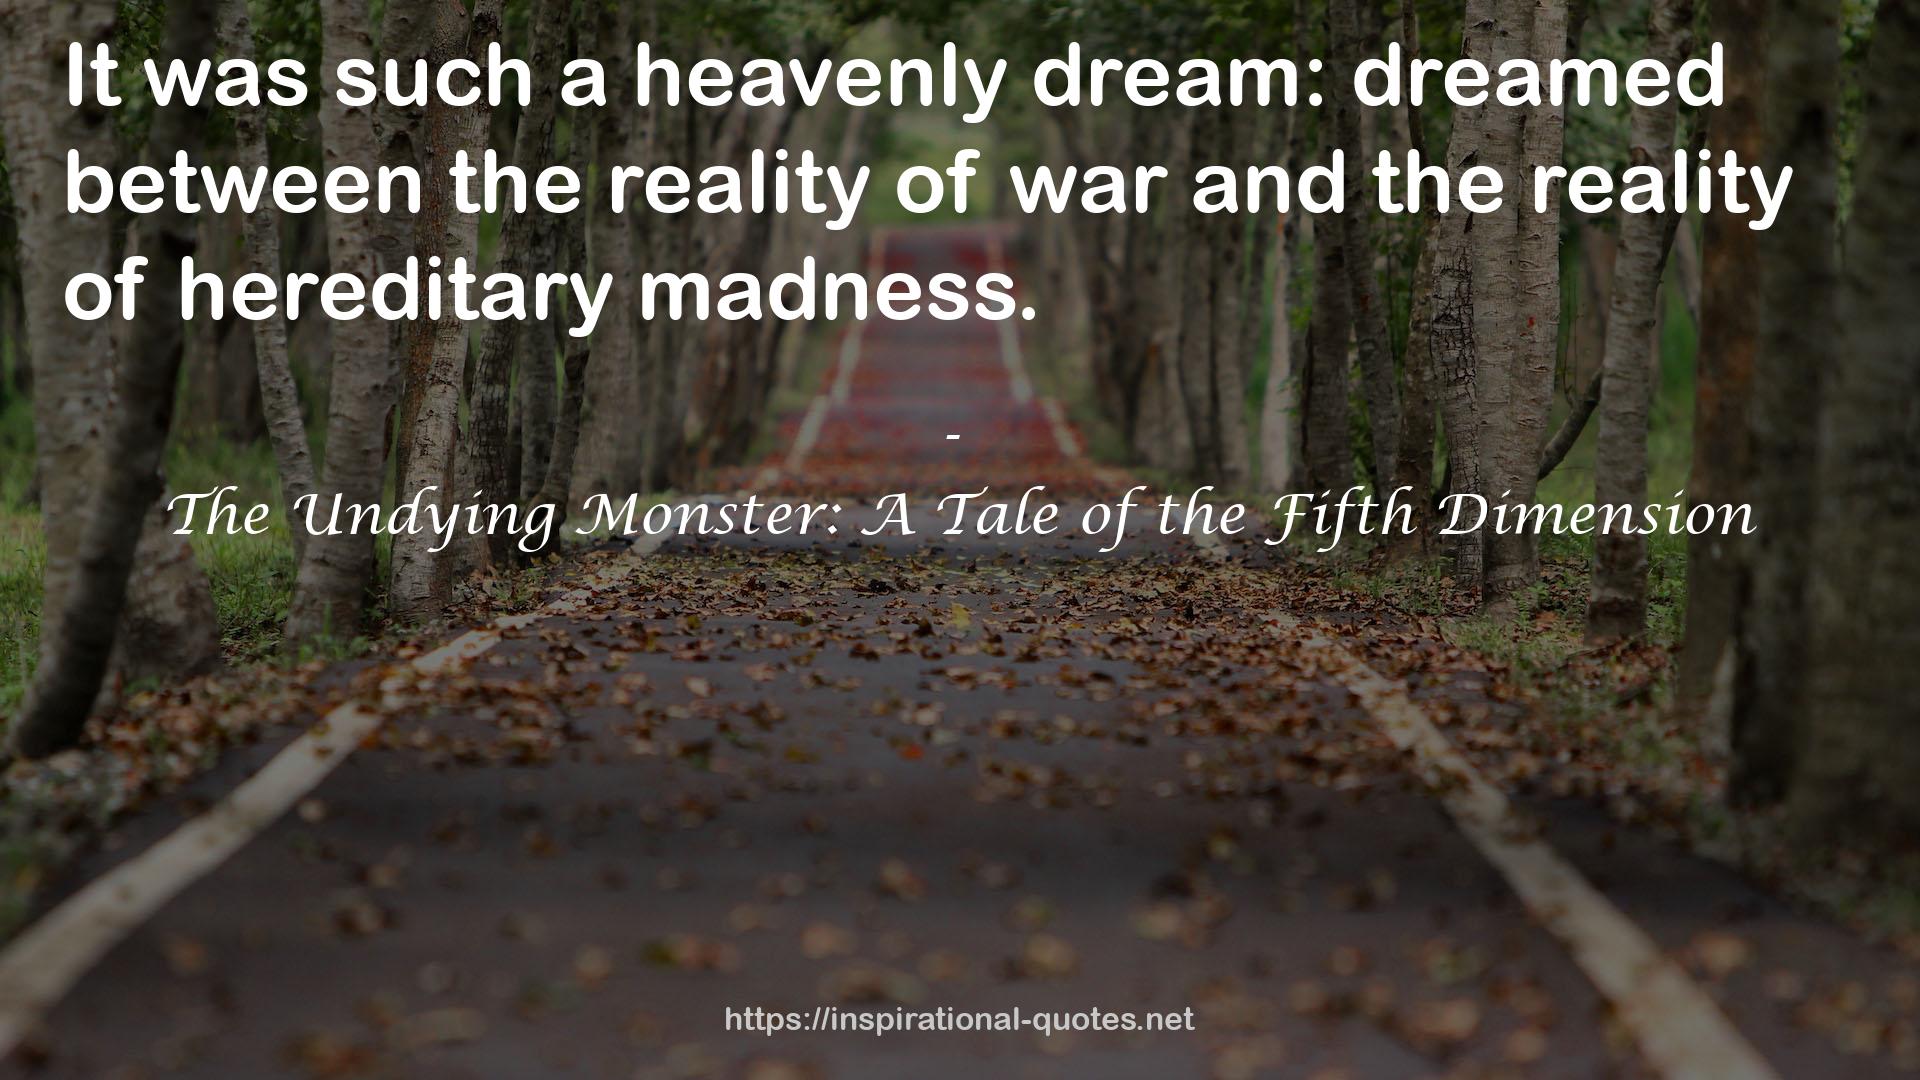 The Undying Monster: A Tale of the Fifth Dimension QUOTES